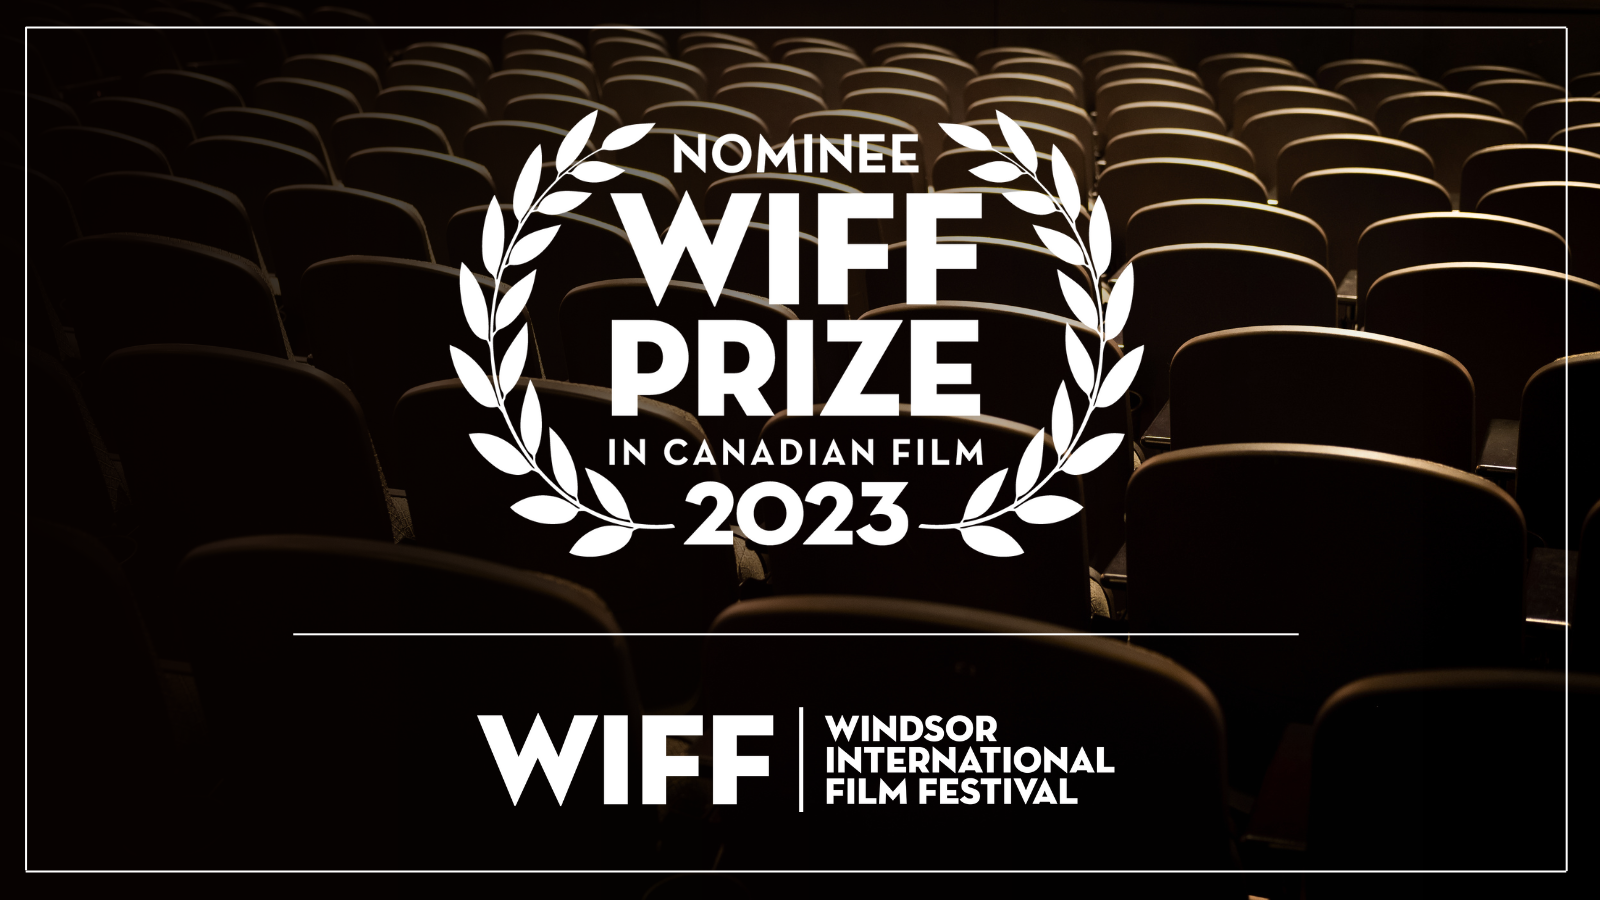 WIFF ANNOUNCES 2023 PRIZE IN CANADIAN FILM NOMINEES